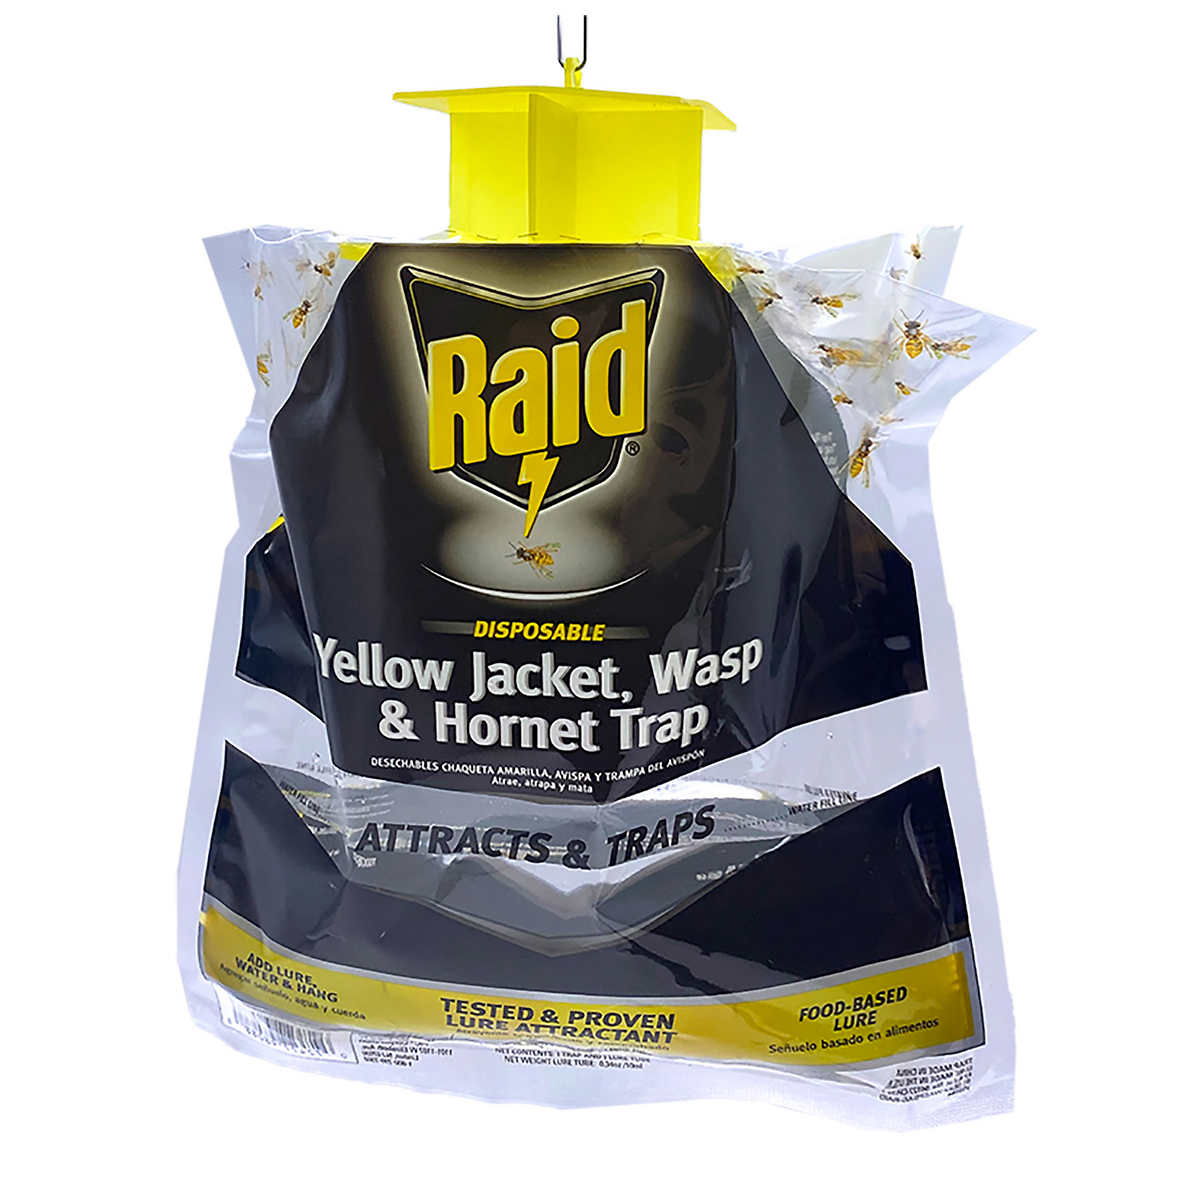 Raid Disposable Wasp, Yellow Jacket and Hornet Trap 3-pack